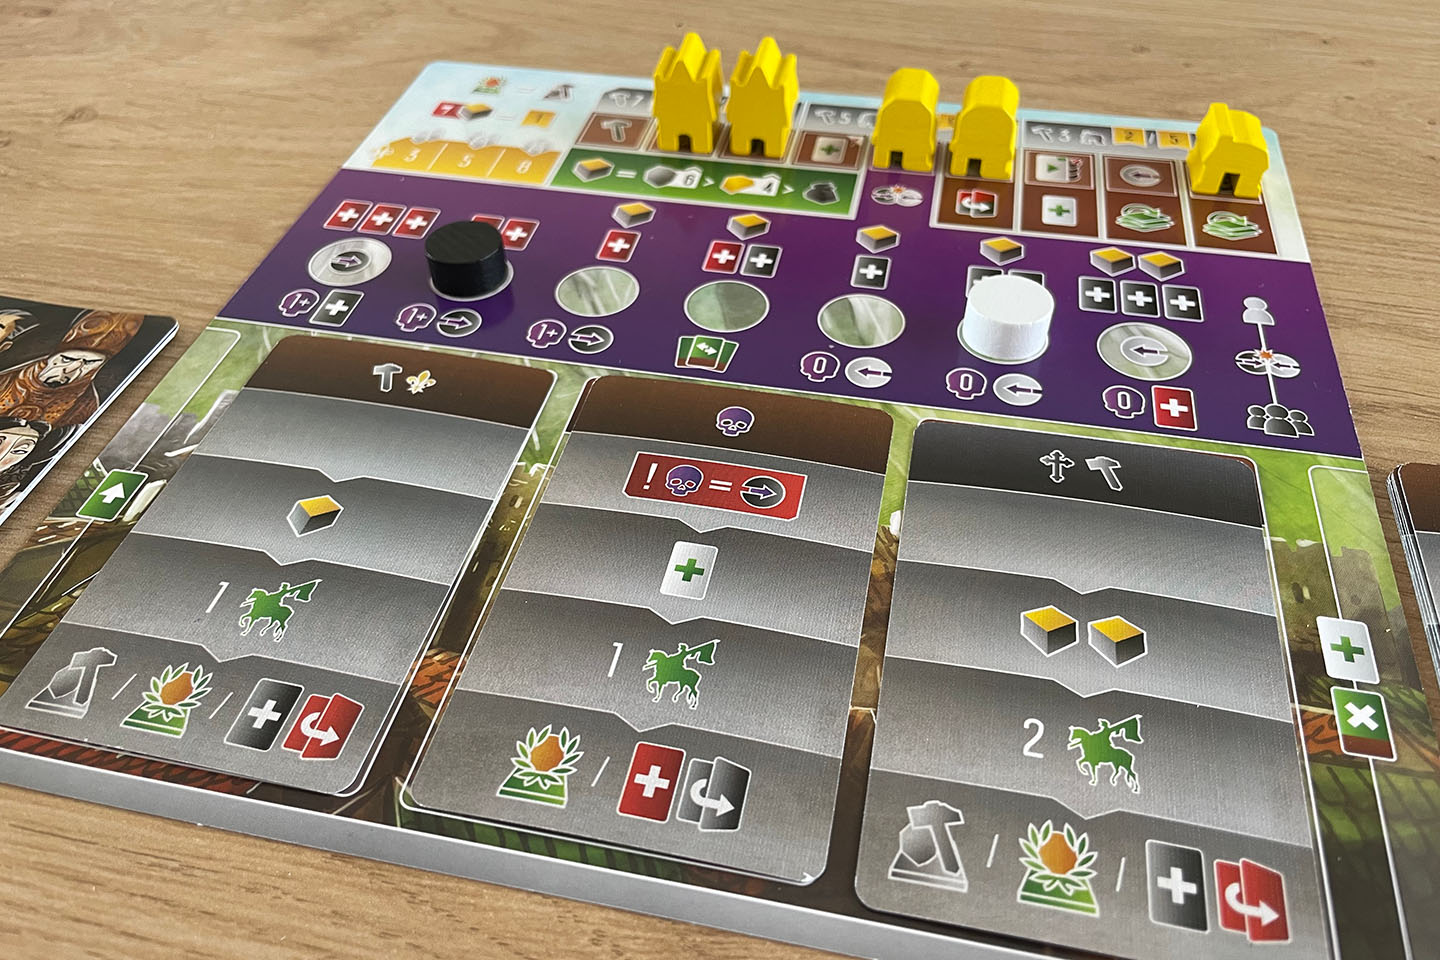 The AI player board is pretty similar to your board. The scheme cards are simple and clear.